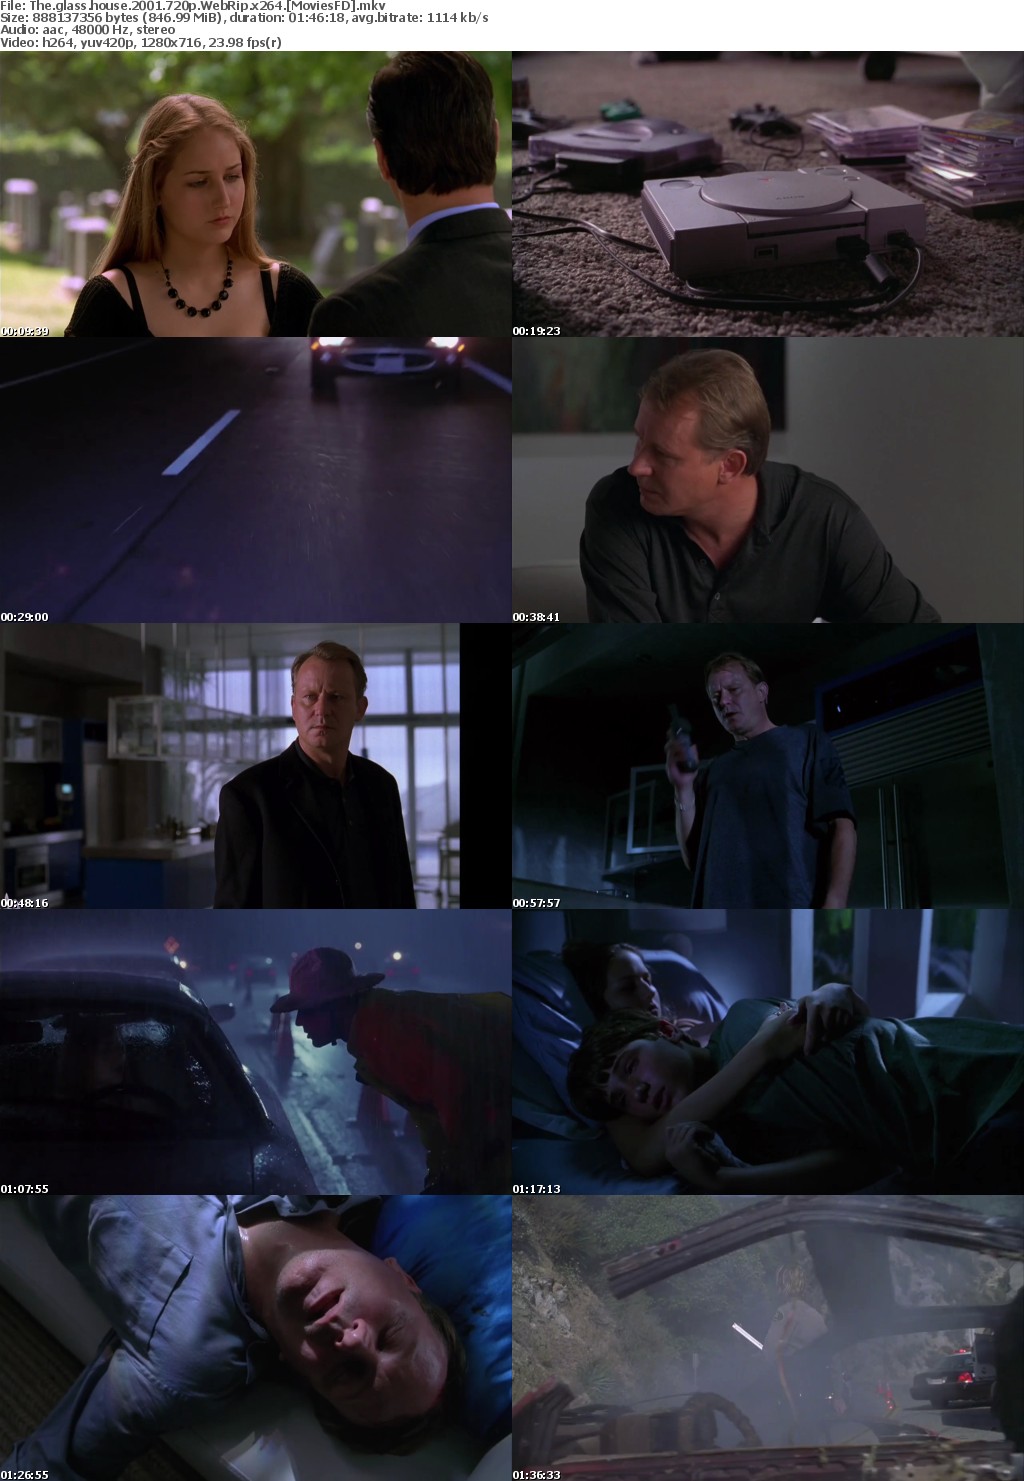 The Glass House (2001) 720P Webrip X264 Moviesfd